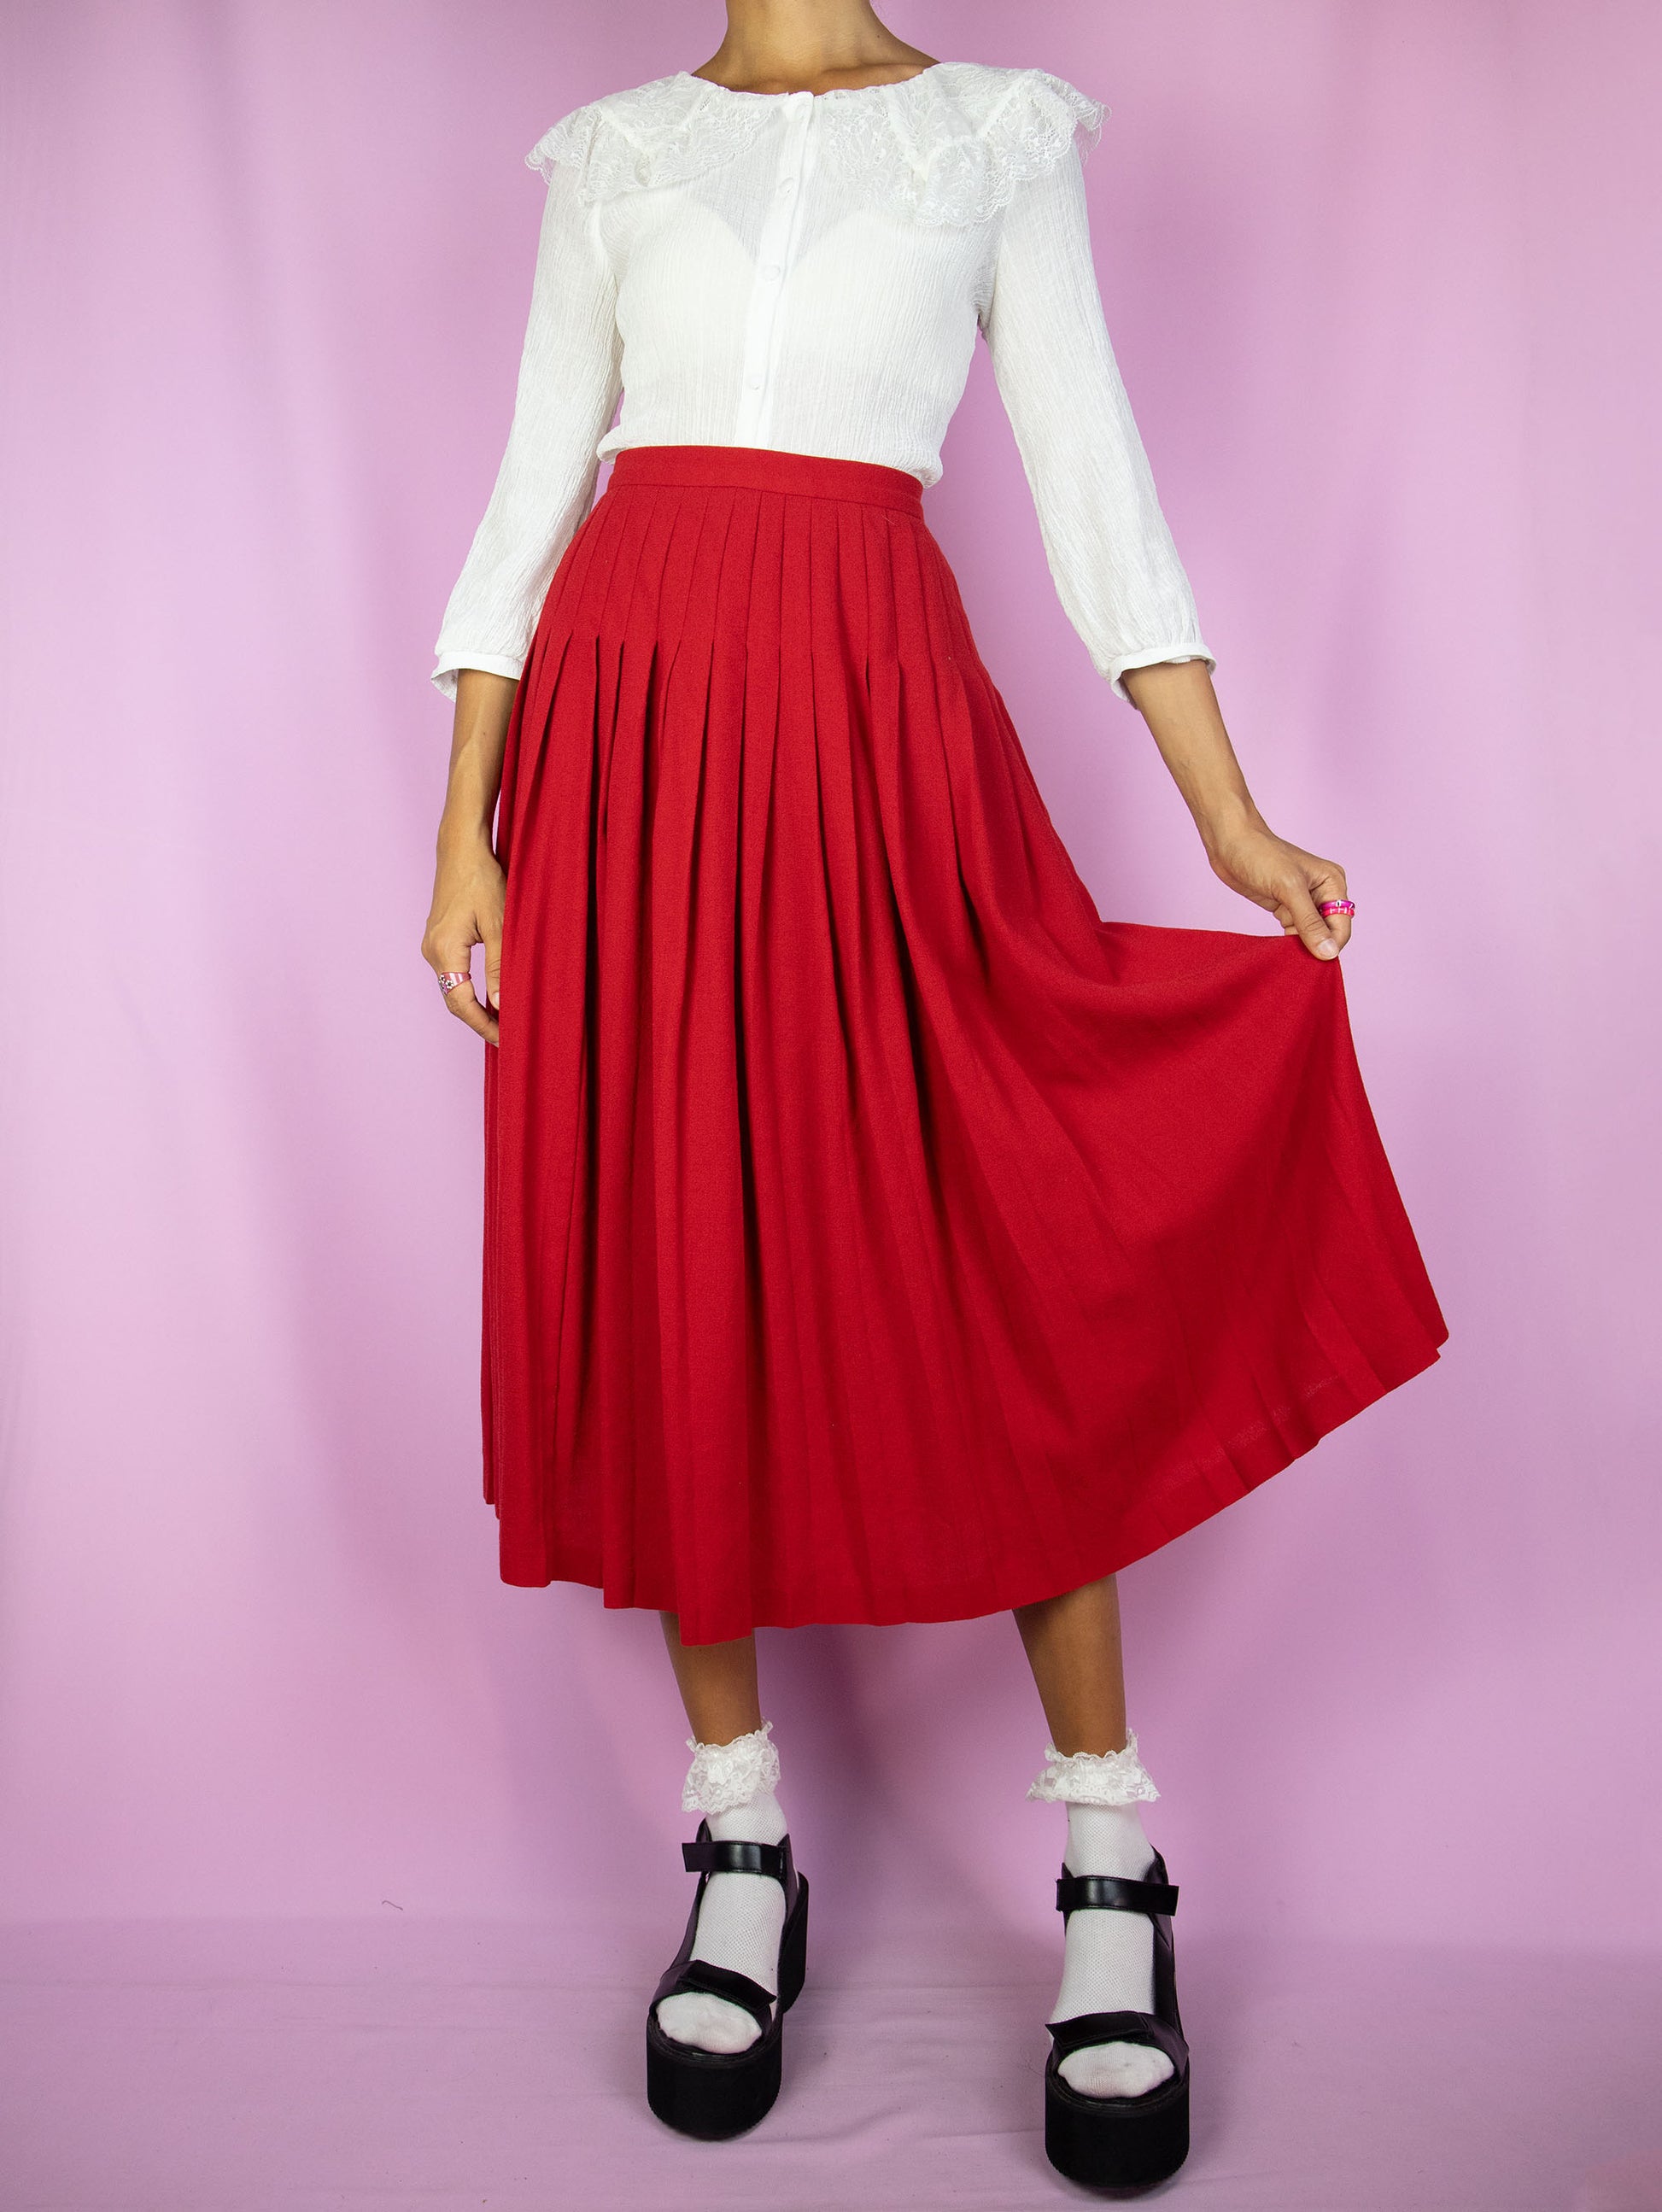 The Vintage 80s Red Wool Pleated Skirt is a midi skirt made of pure new wool featuring a side button closure. Classic preppy 1980s skirt.